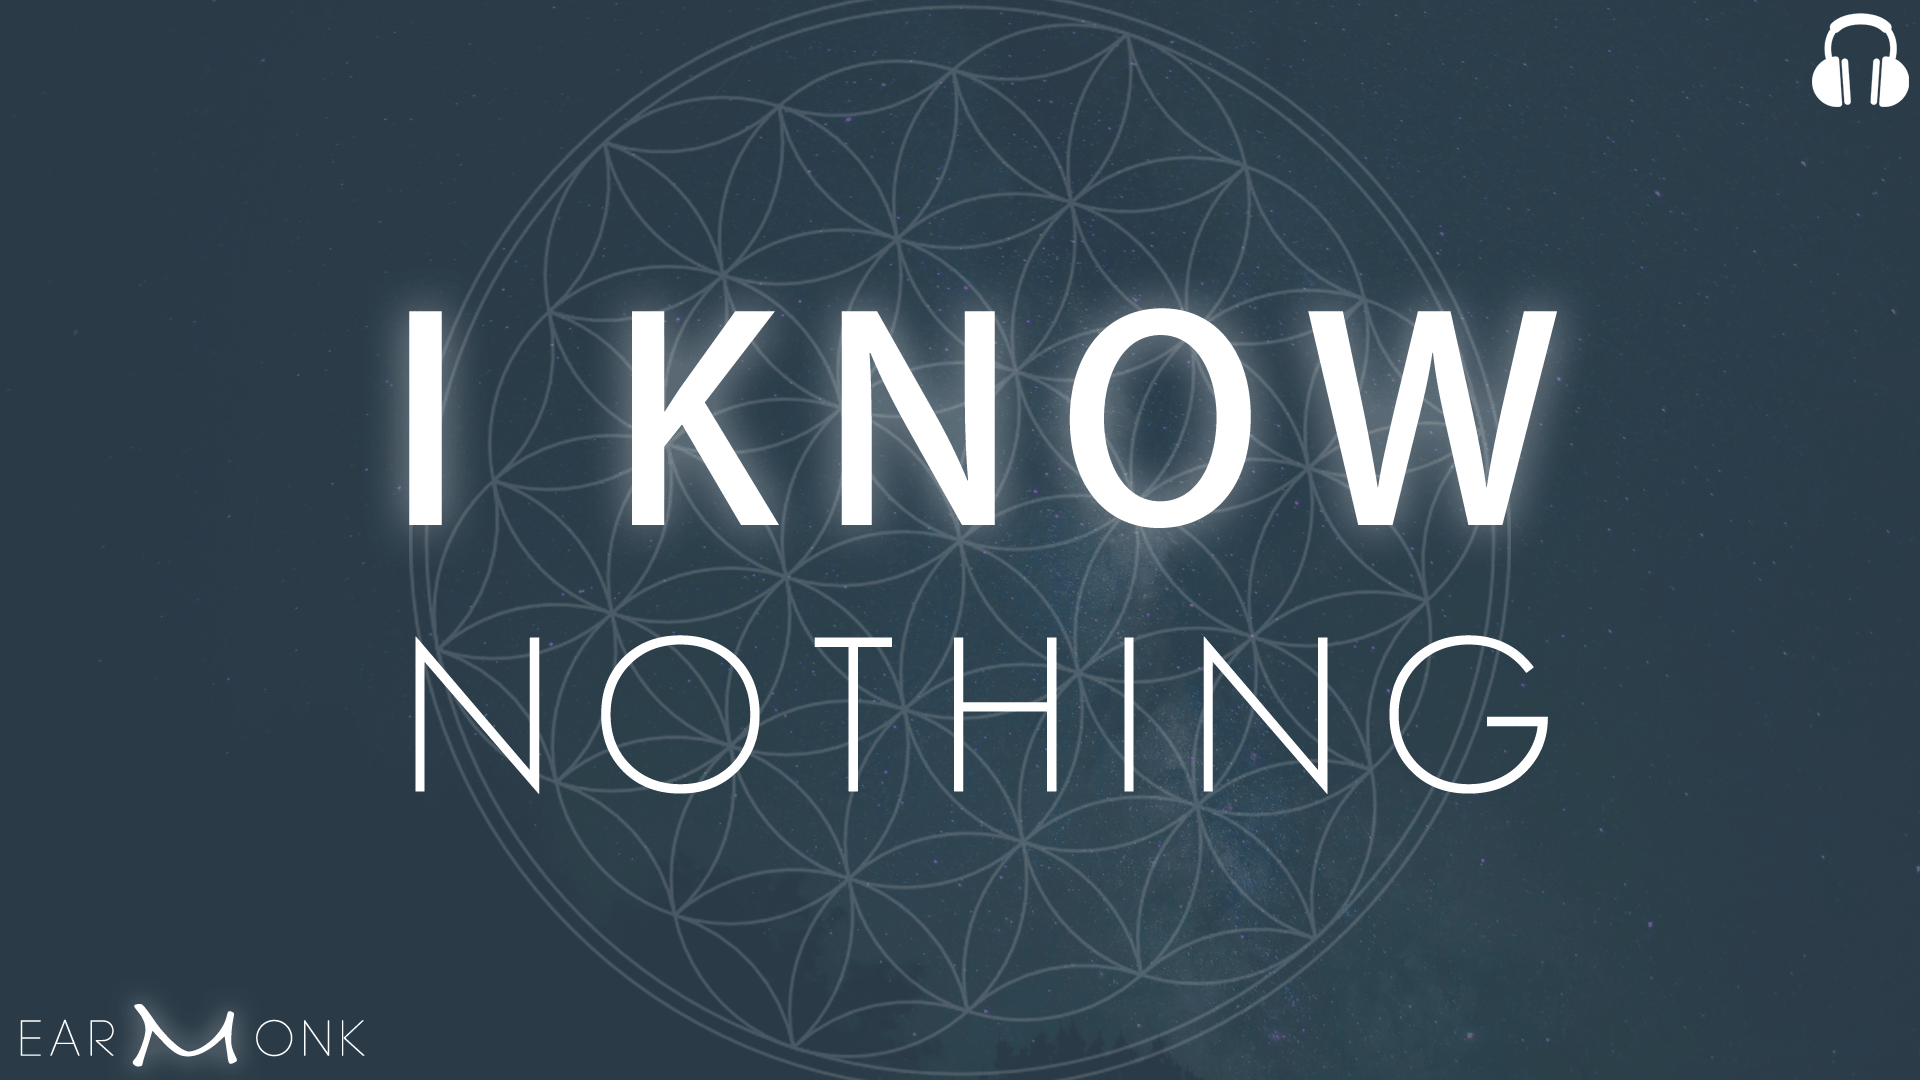 I-know-nothing